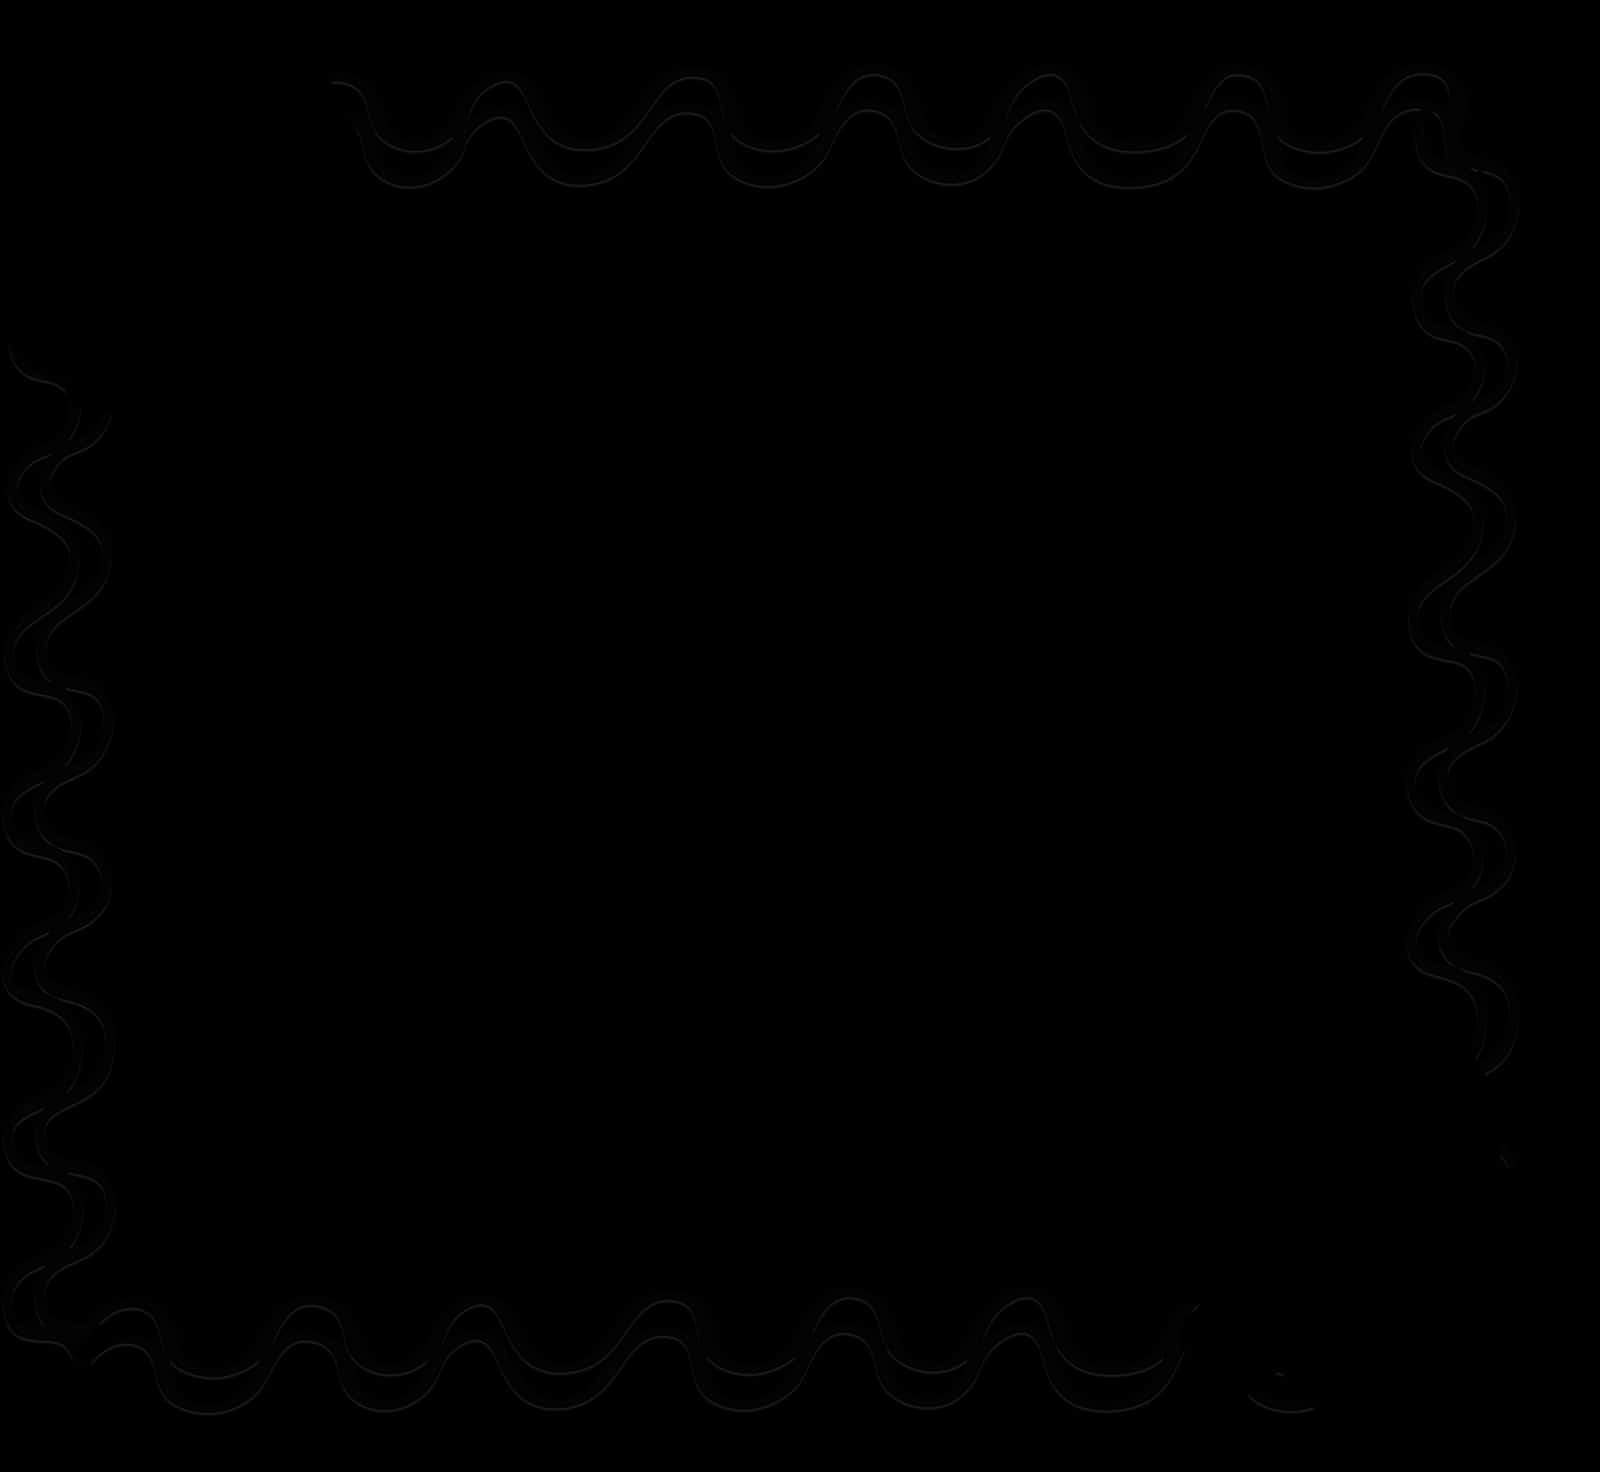 Abstract Black Wavy Design PNG image